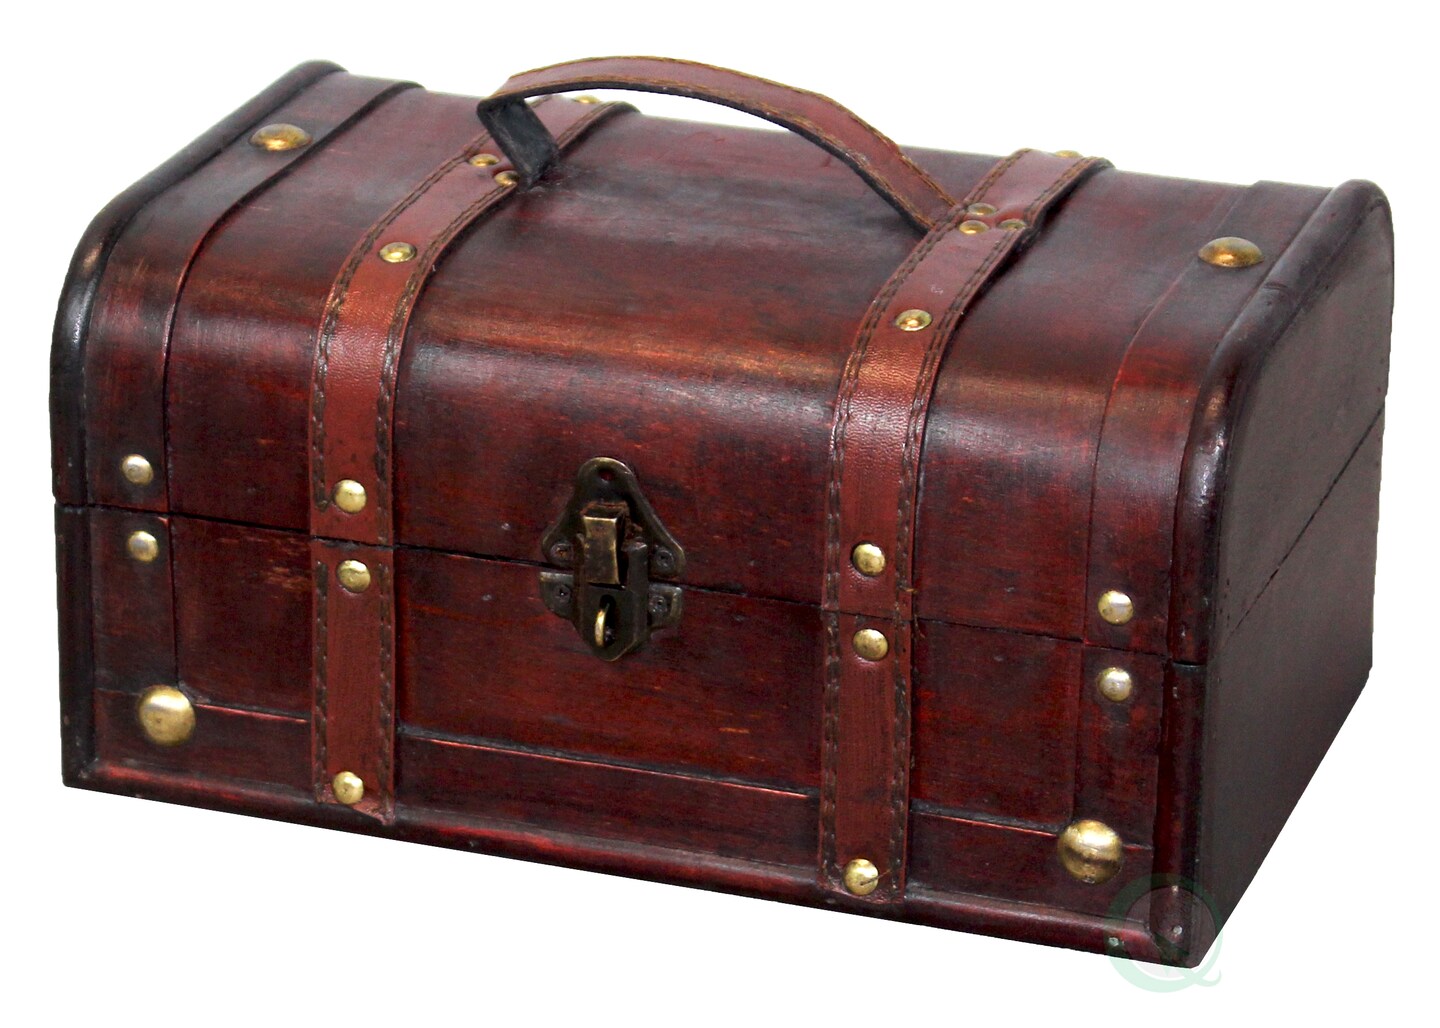 Decorative Vintage Wood Treasure box - Wooden Trunk Chest with Handle